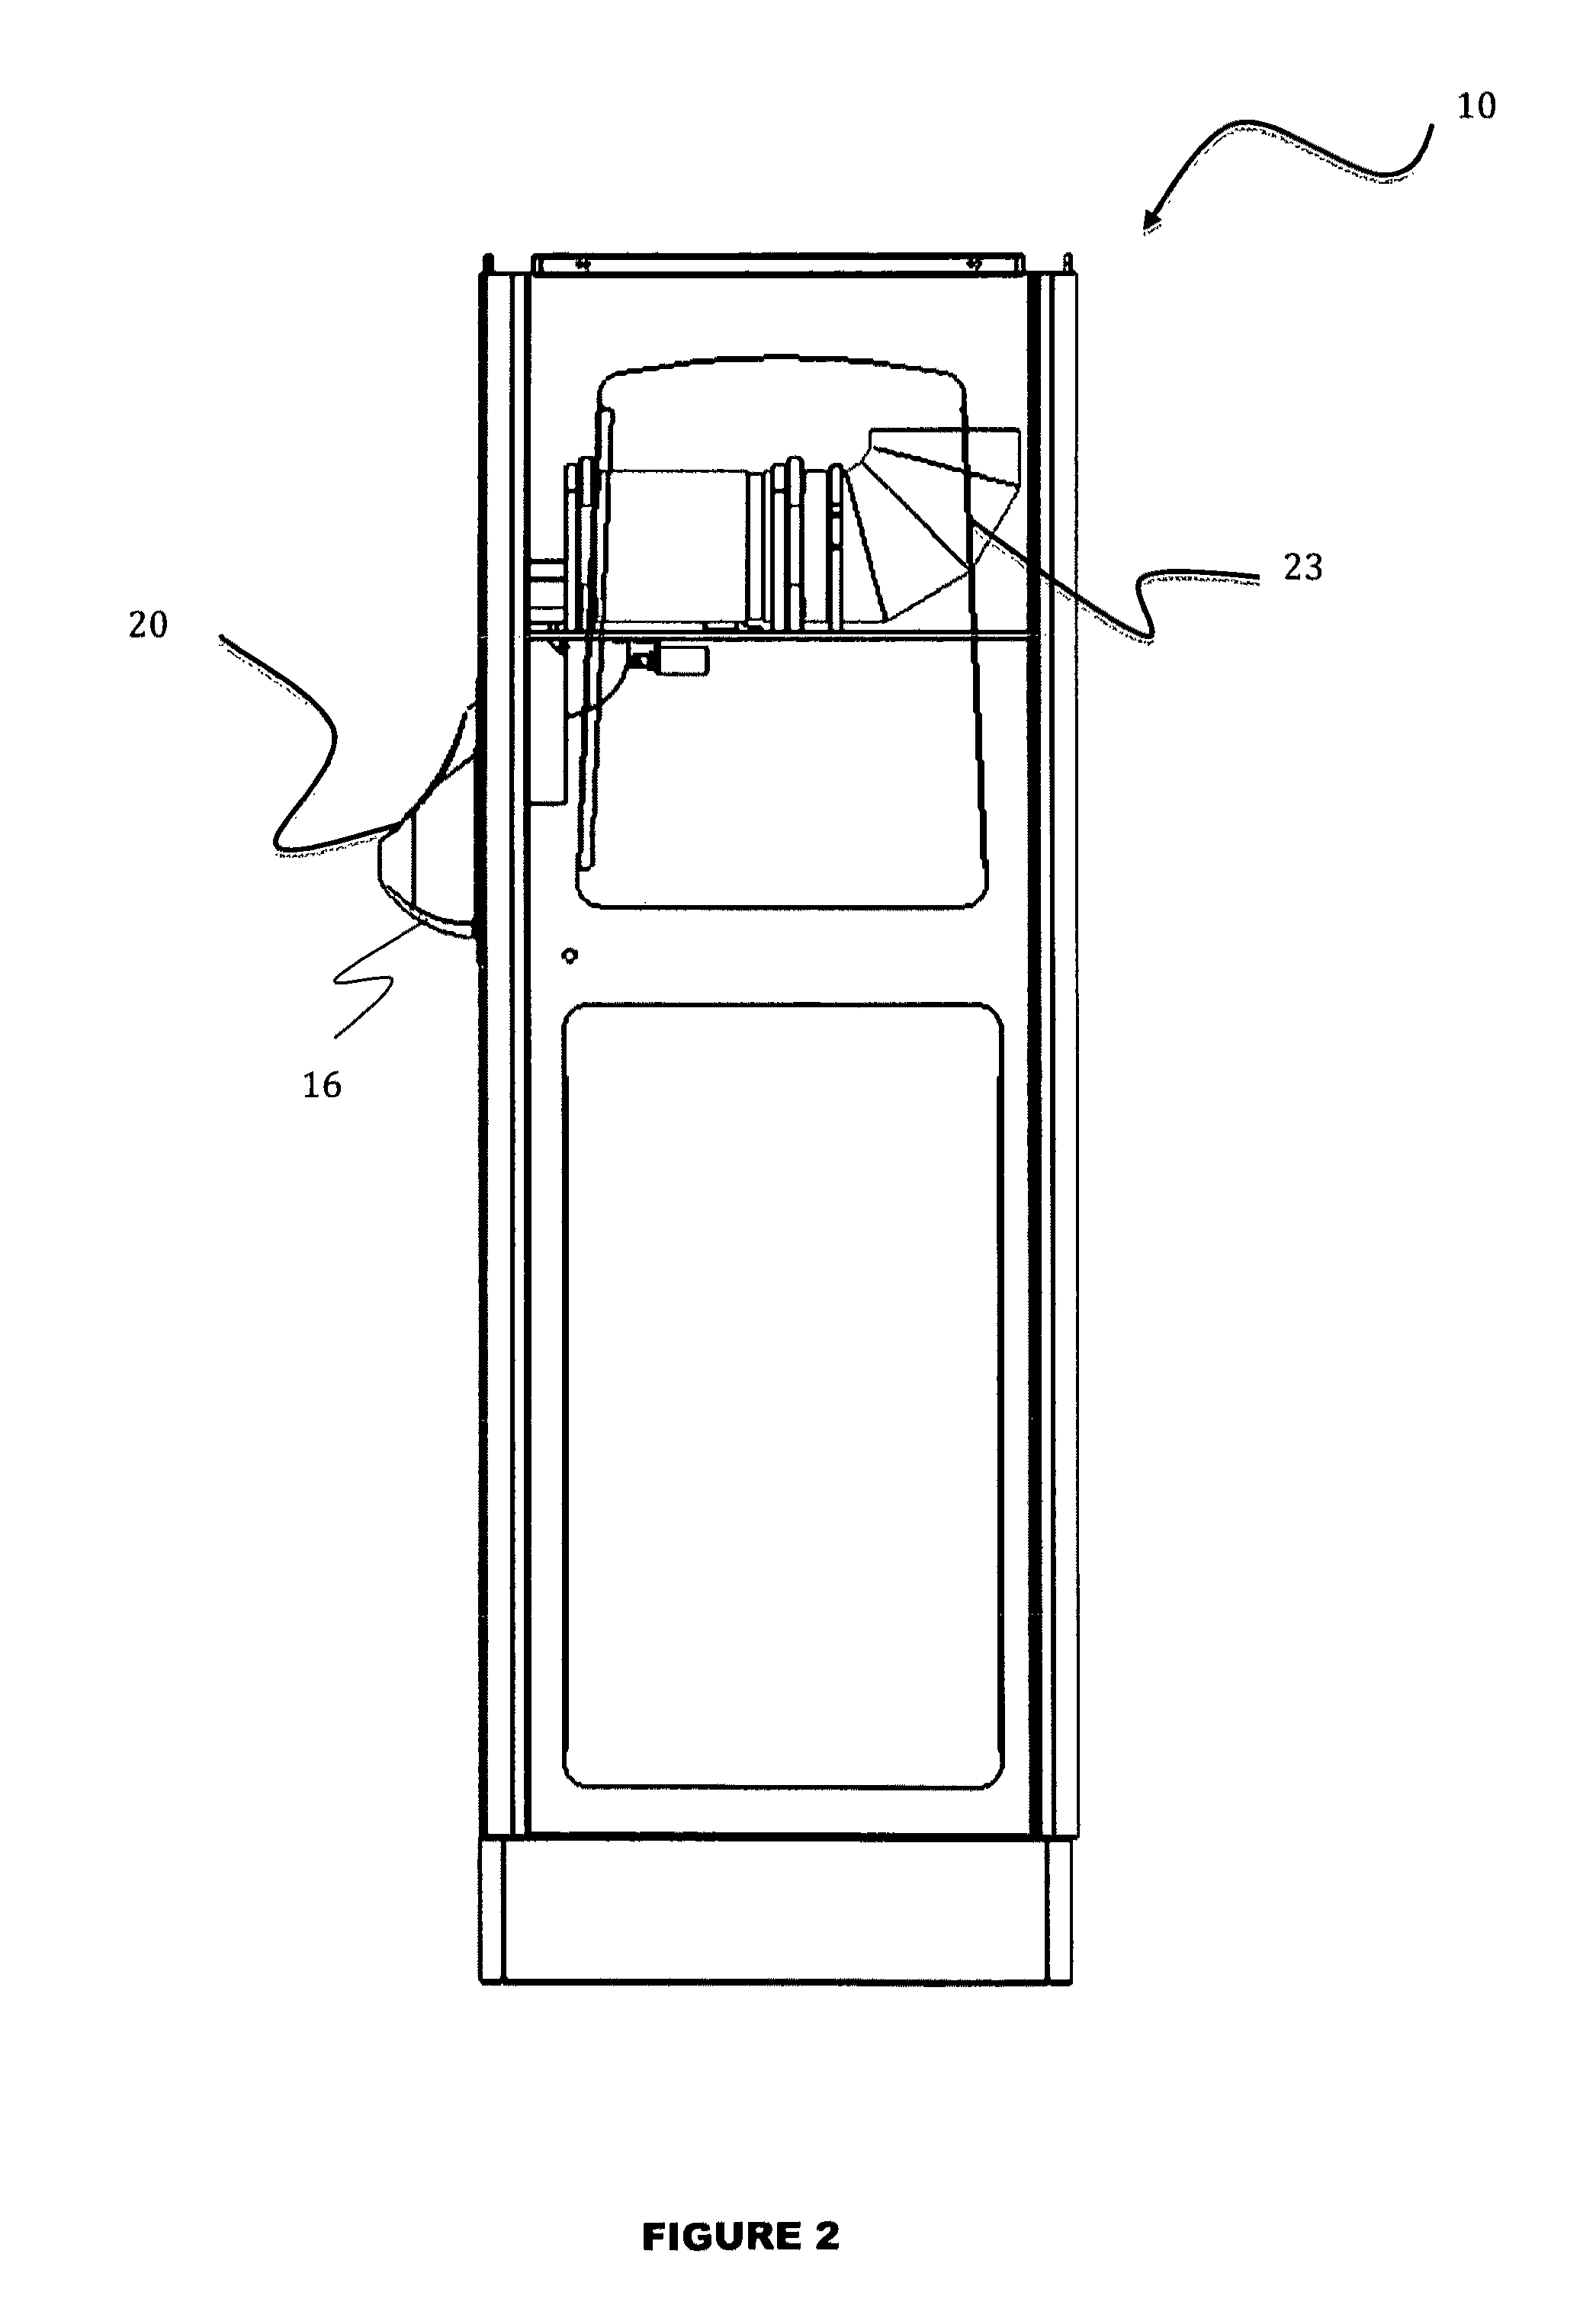 Method for measuring effectiveness of sampling activity and providing pre-market product feedback